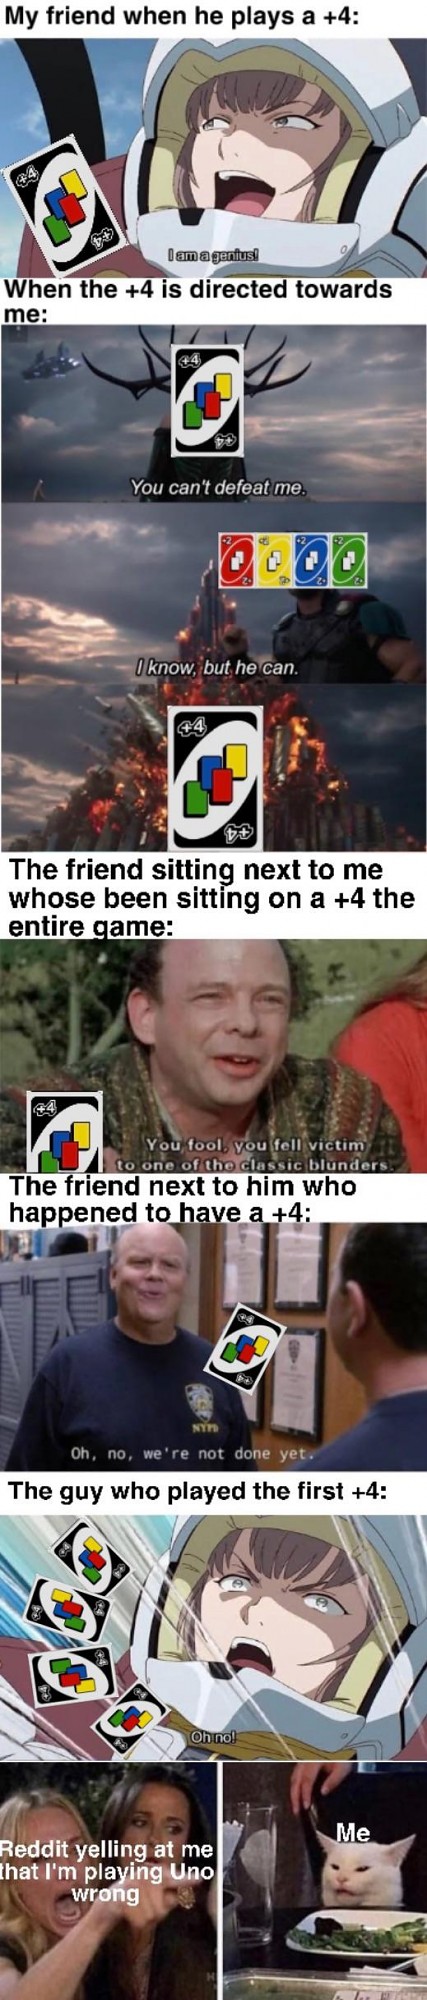 The best way to play uno